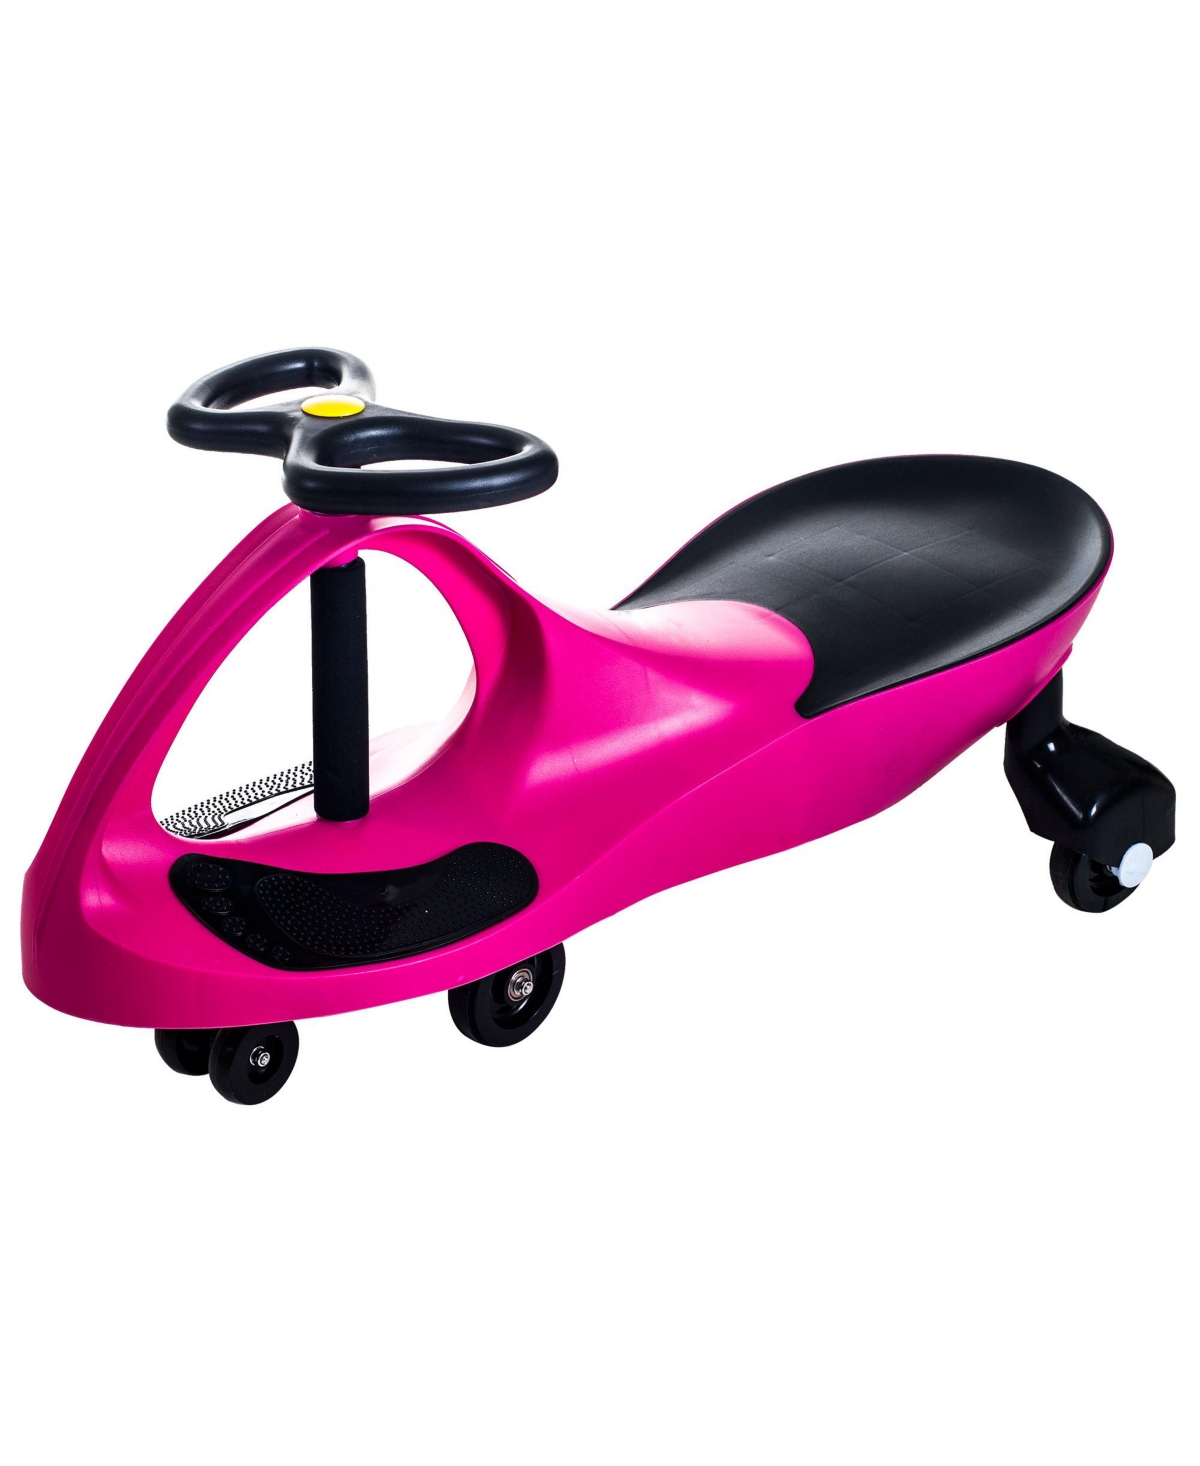 Lil' Rider Kids' Ride On Wiggle Car In Pink